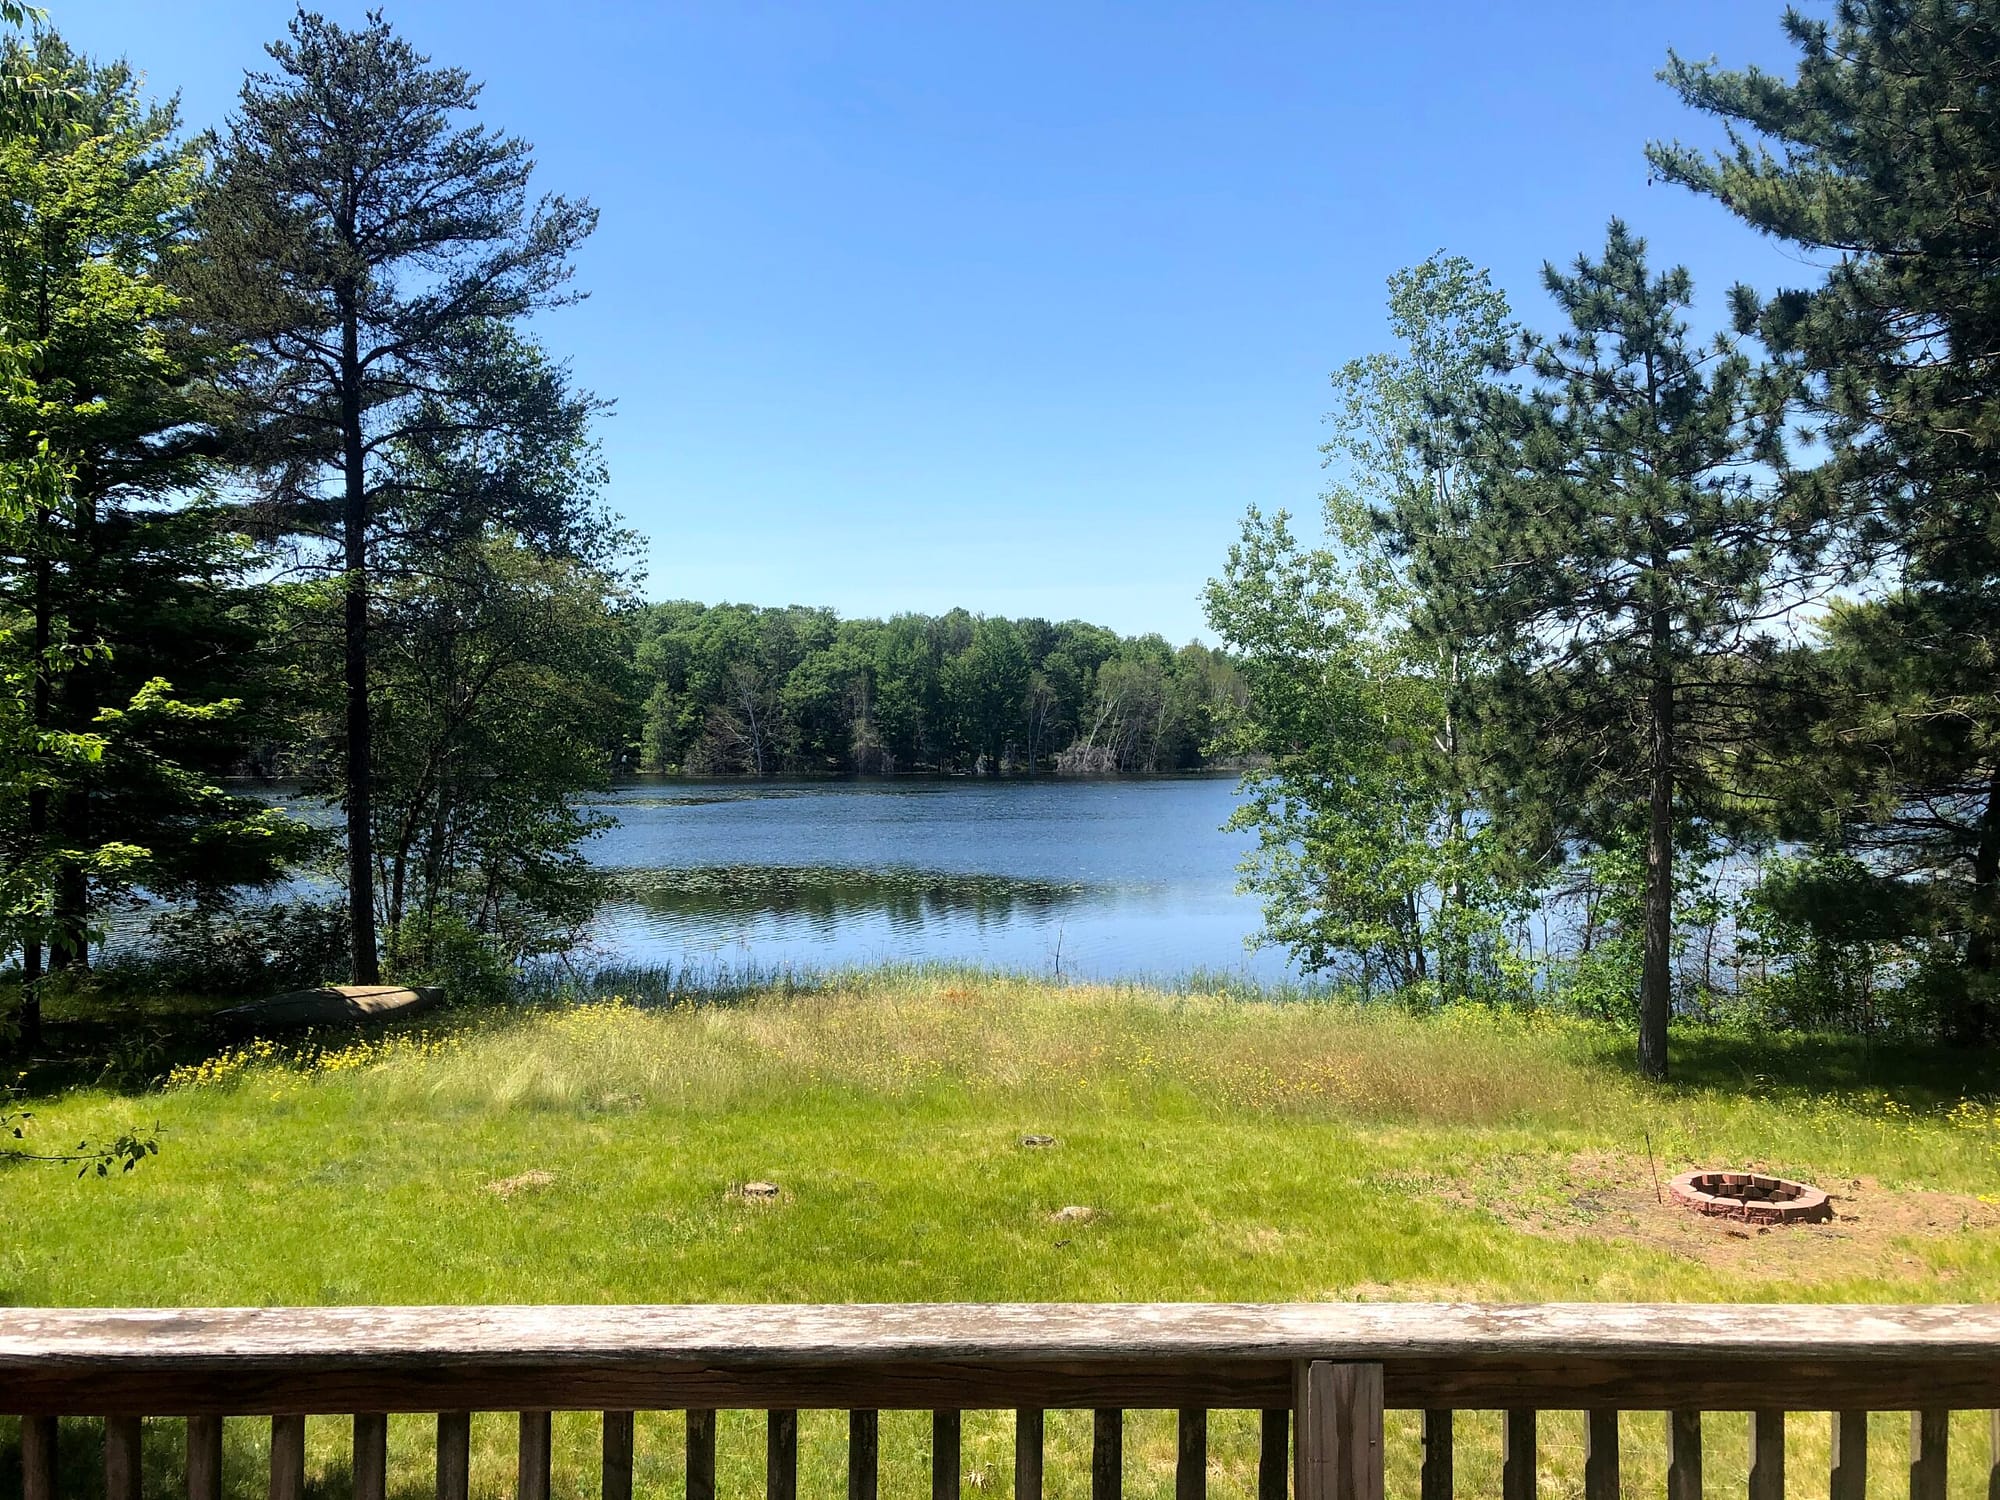 View of the lake at Camp Miller, summer 2020